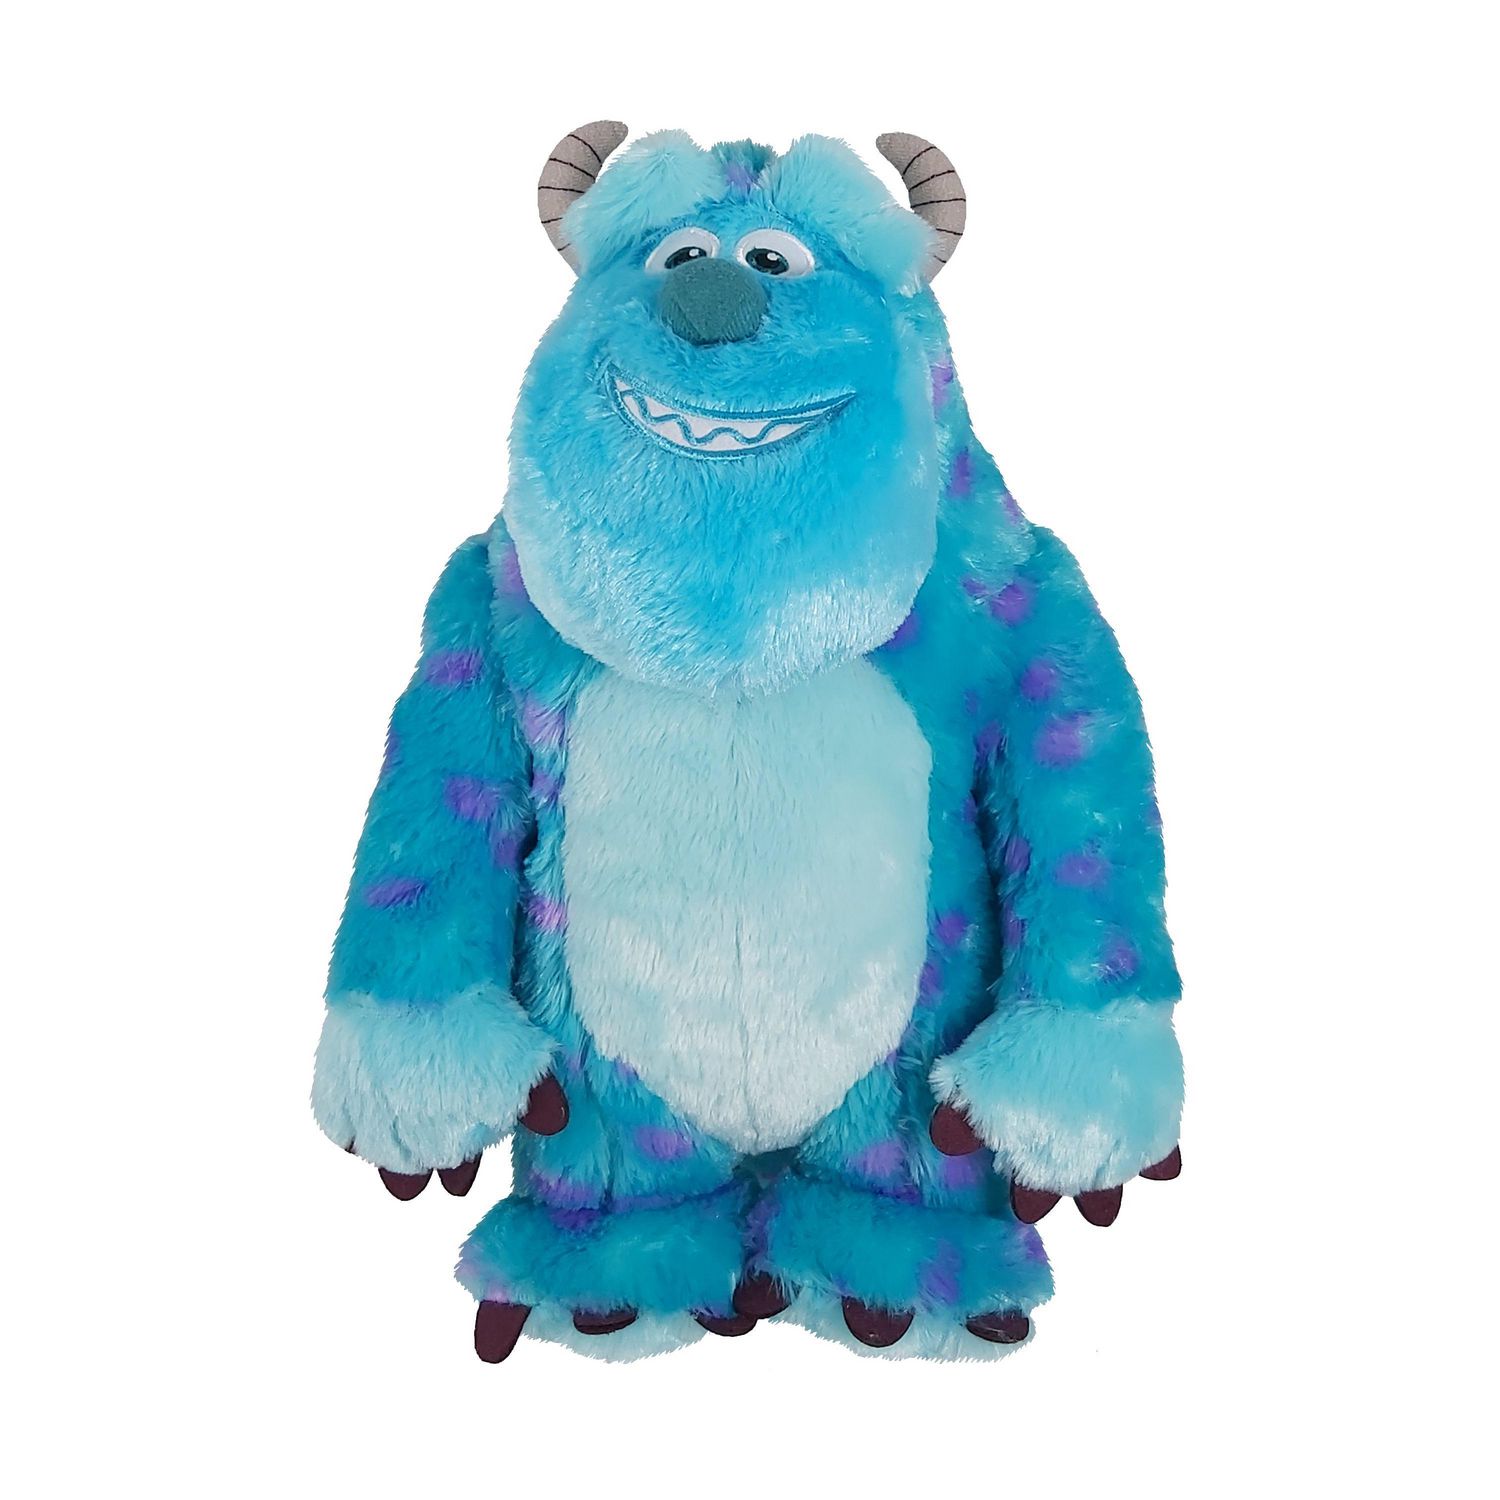 sully monsters inc plush